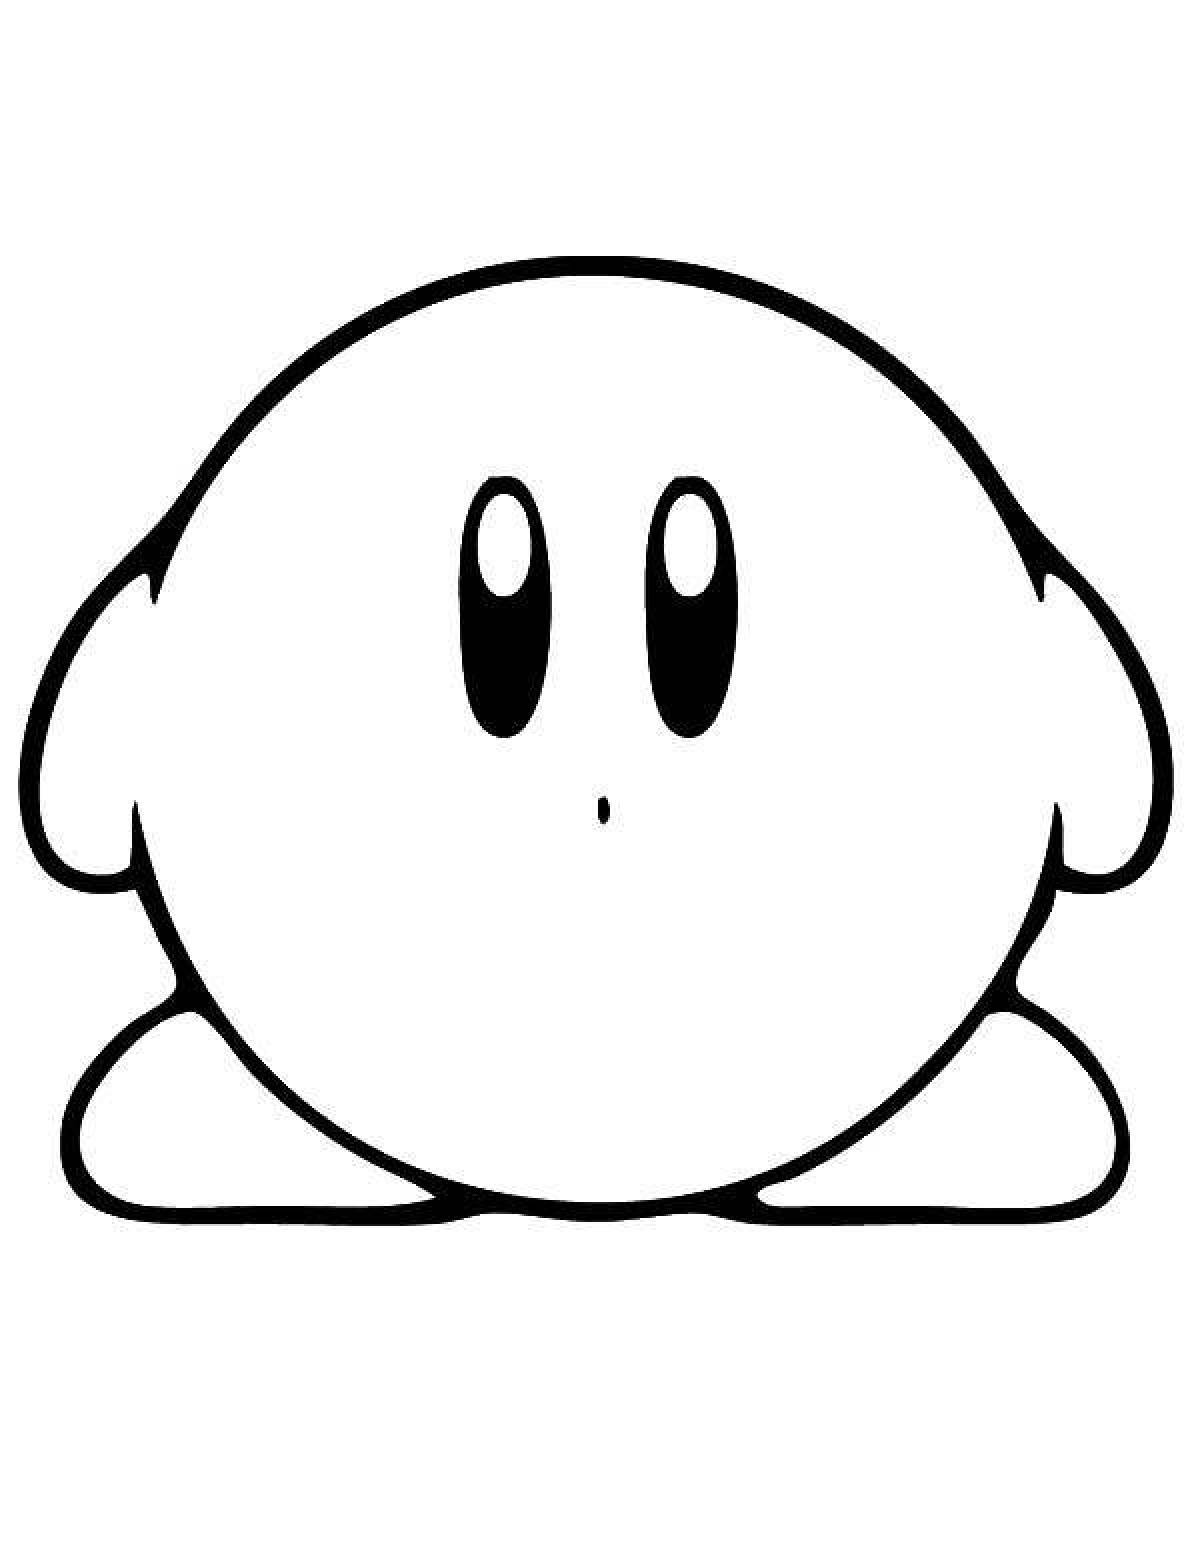 Spicy kirby coloring page